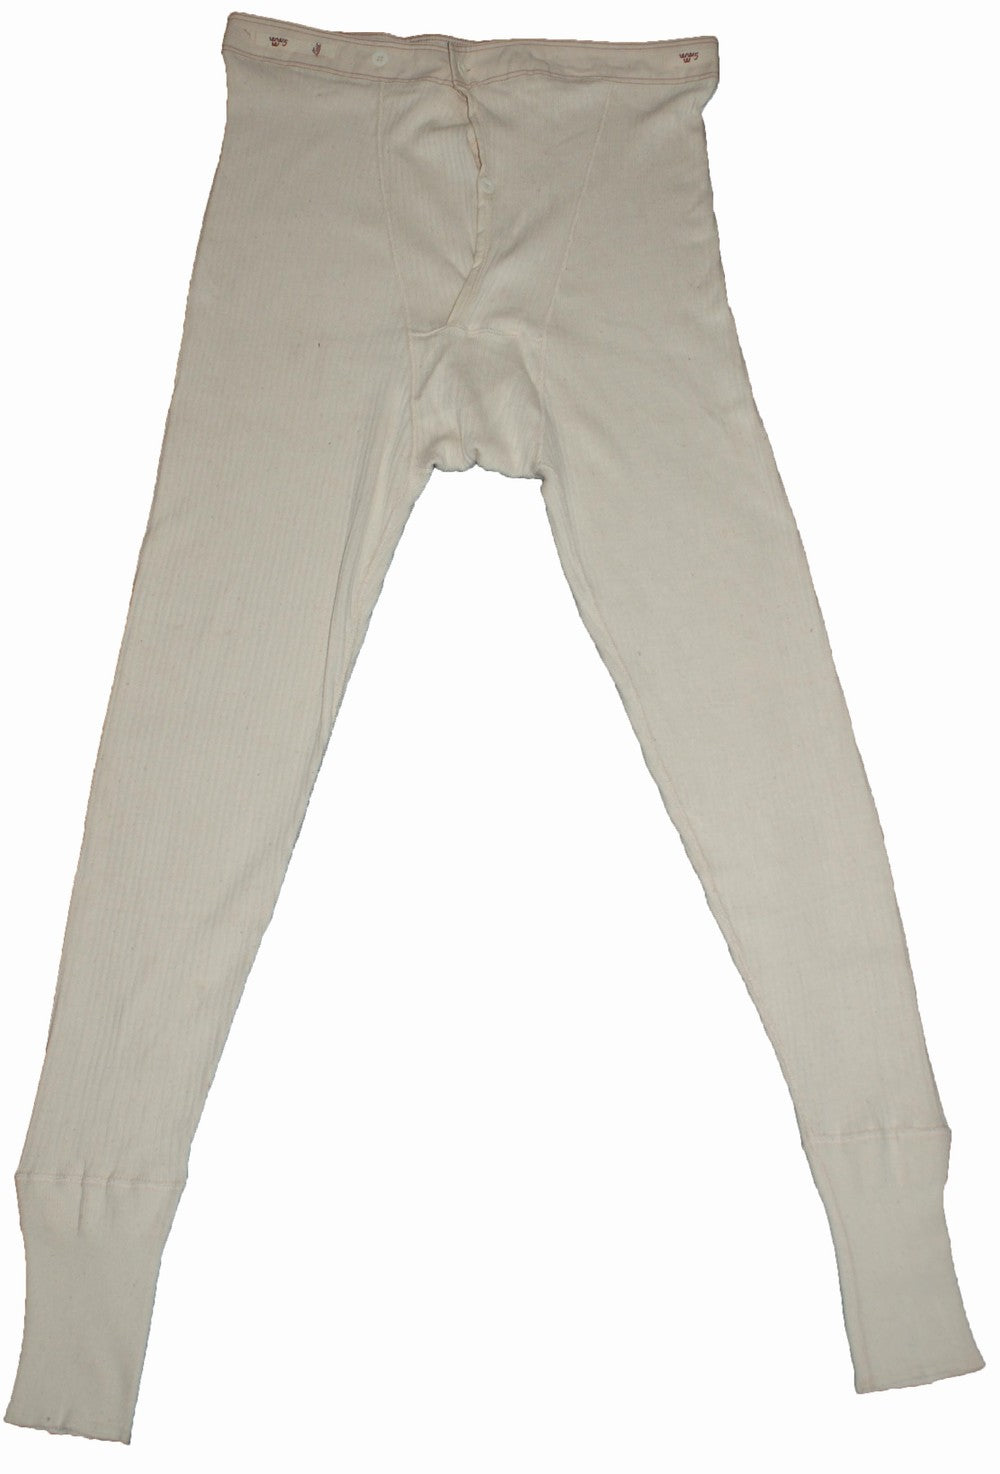 Swedish Army Cotton Thermal Long Johns 100% Cotton Mens Long Underwear NEW  Old Stock Elasticated Waist -  Canada